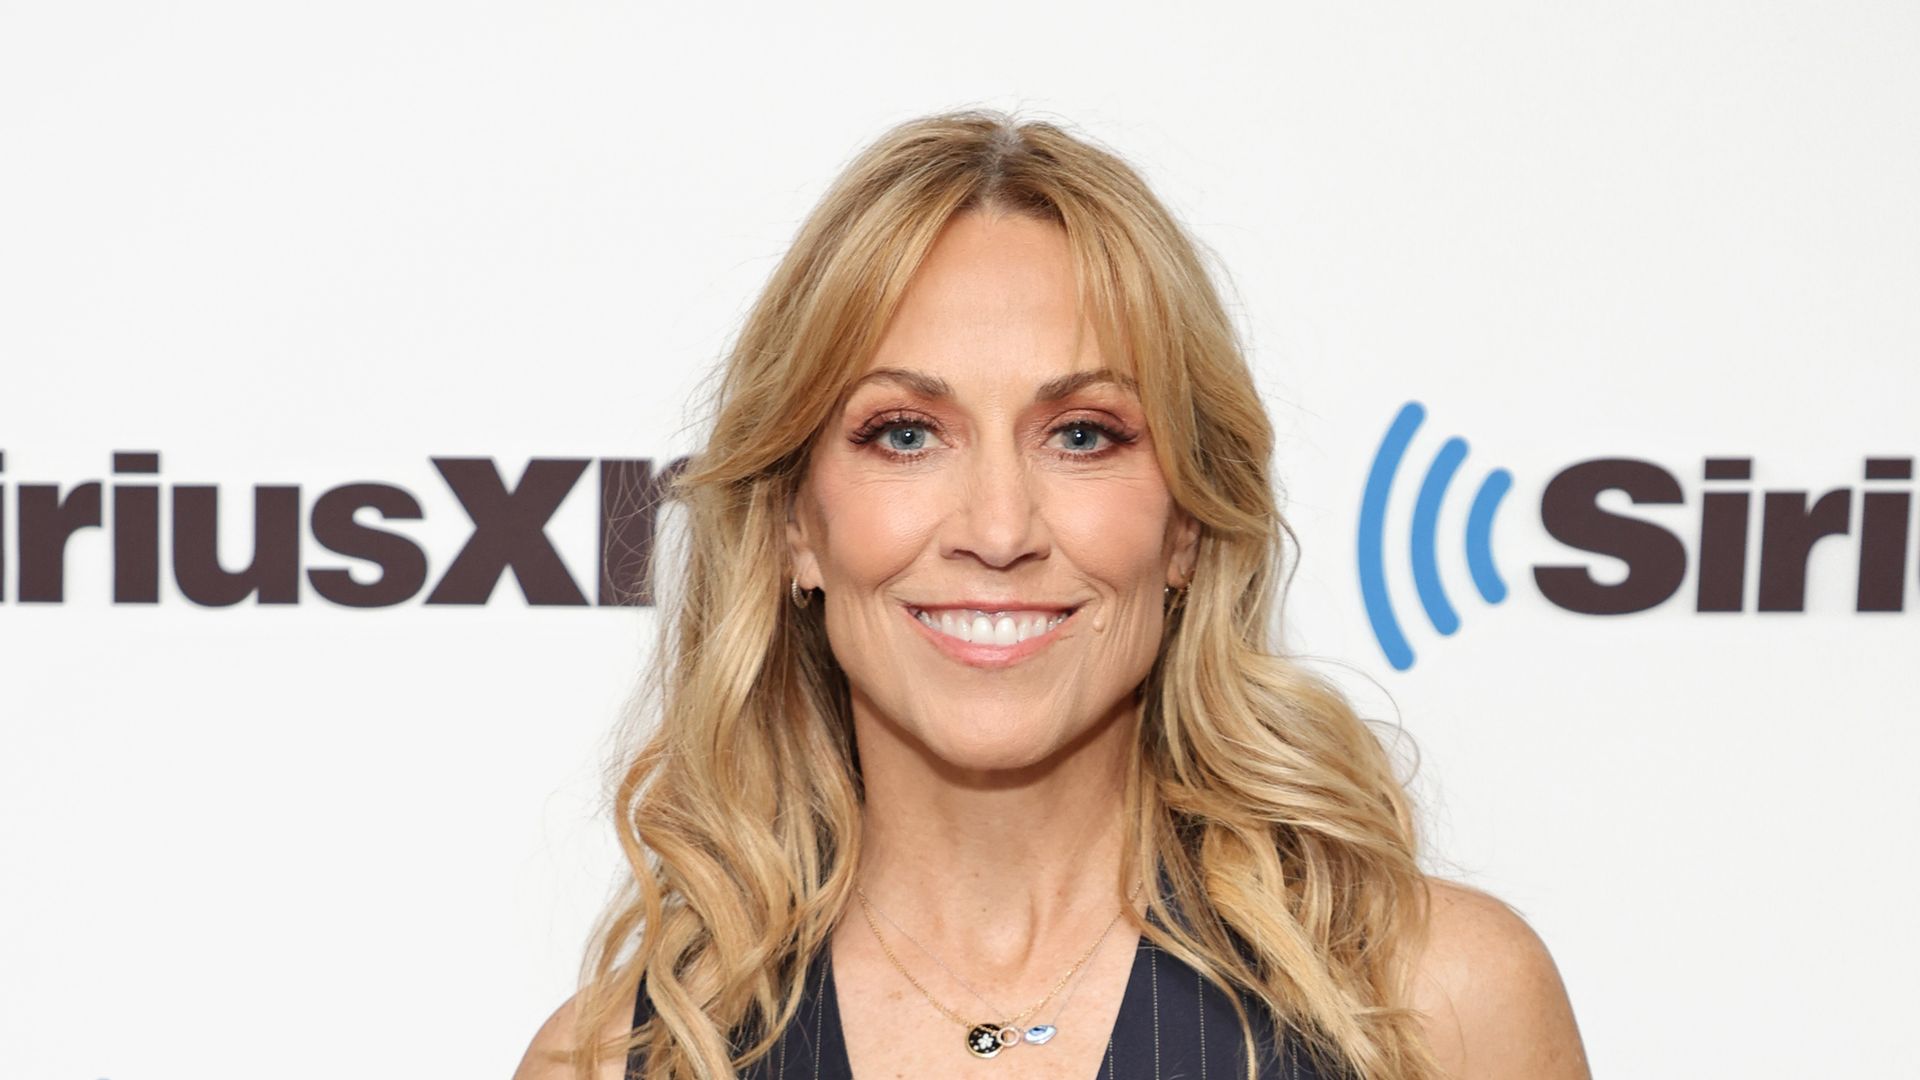 Sheryl Crow visits SiriusXM's 'The Howard Stern Show' on May 04, 2022 in New York City.